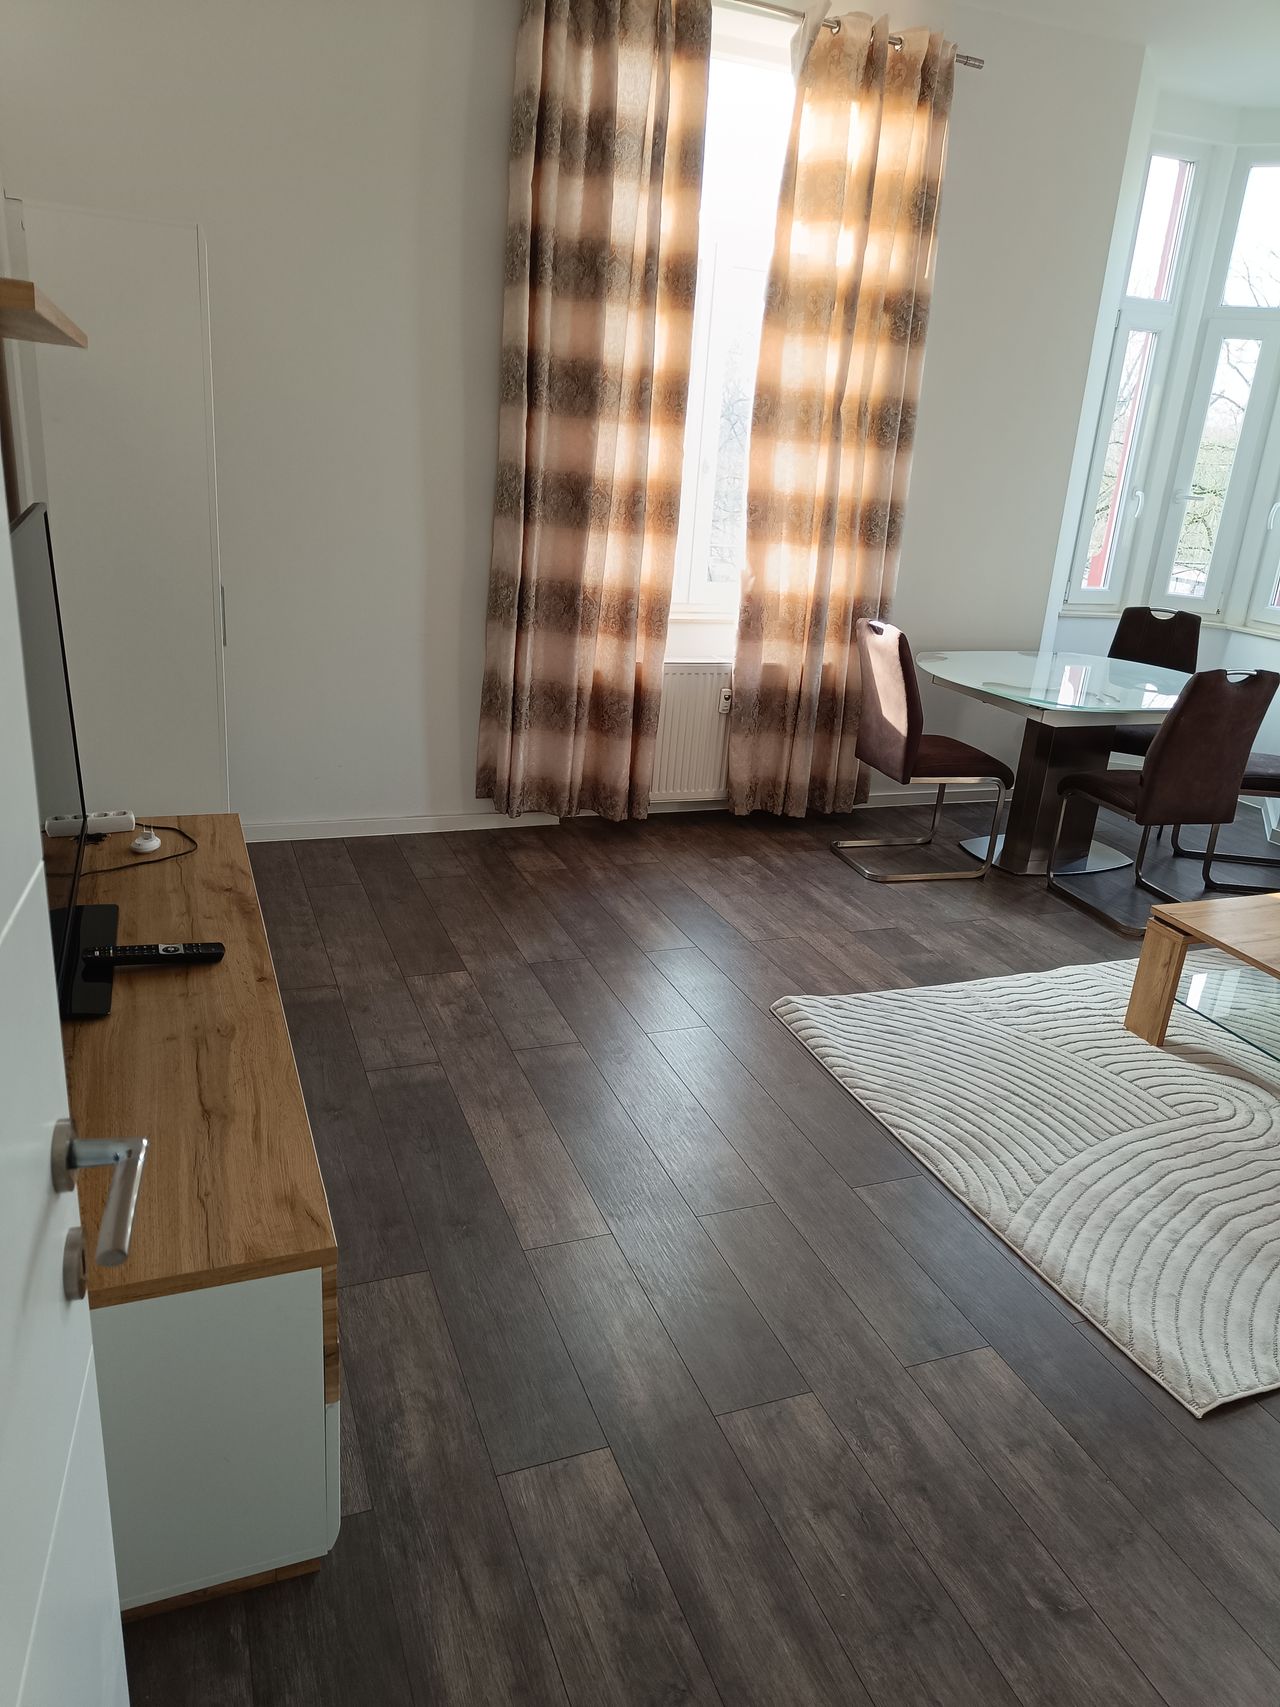 New and cozy suite in Frankfurt am Main